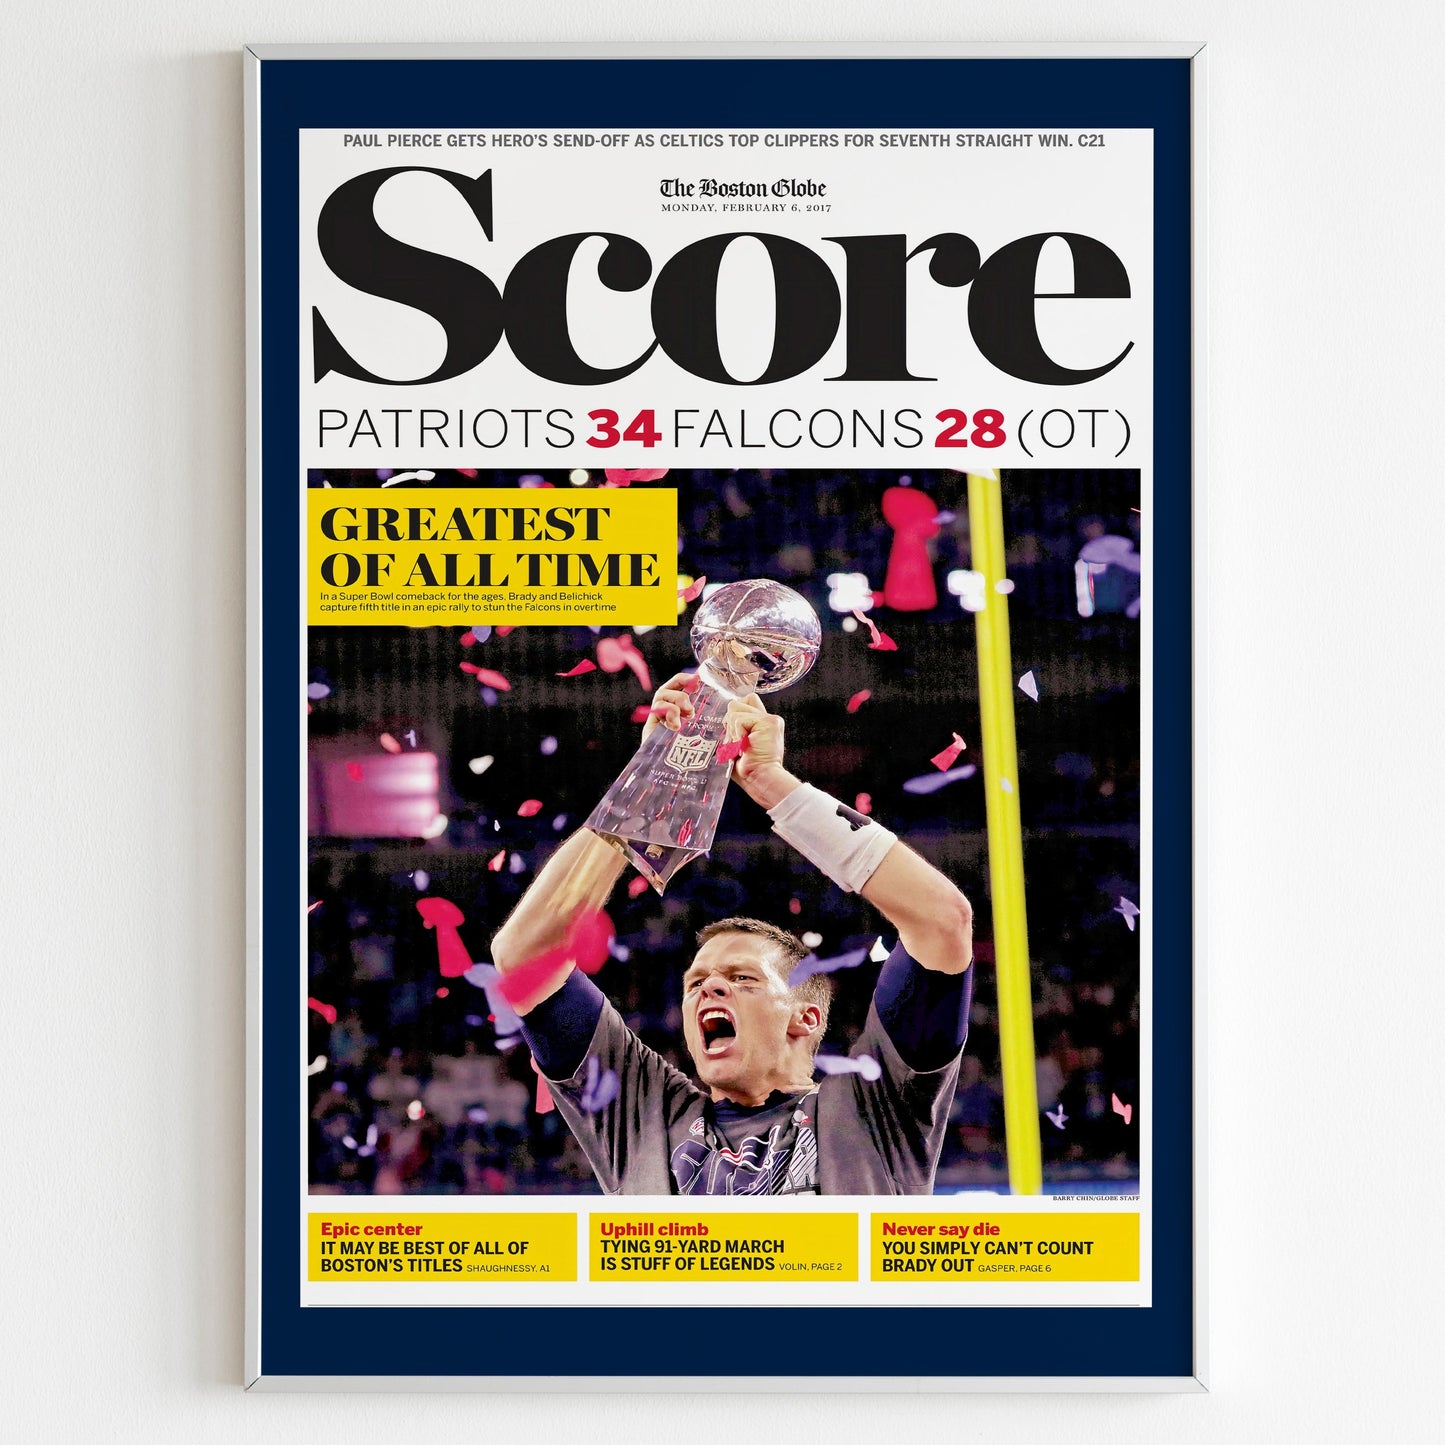 New England Patriots 2017 Super Bowl NFL Champions Front Cover The Boston Globe Newspaper Poster, Football Team Print, Tom Brady Page Poster